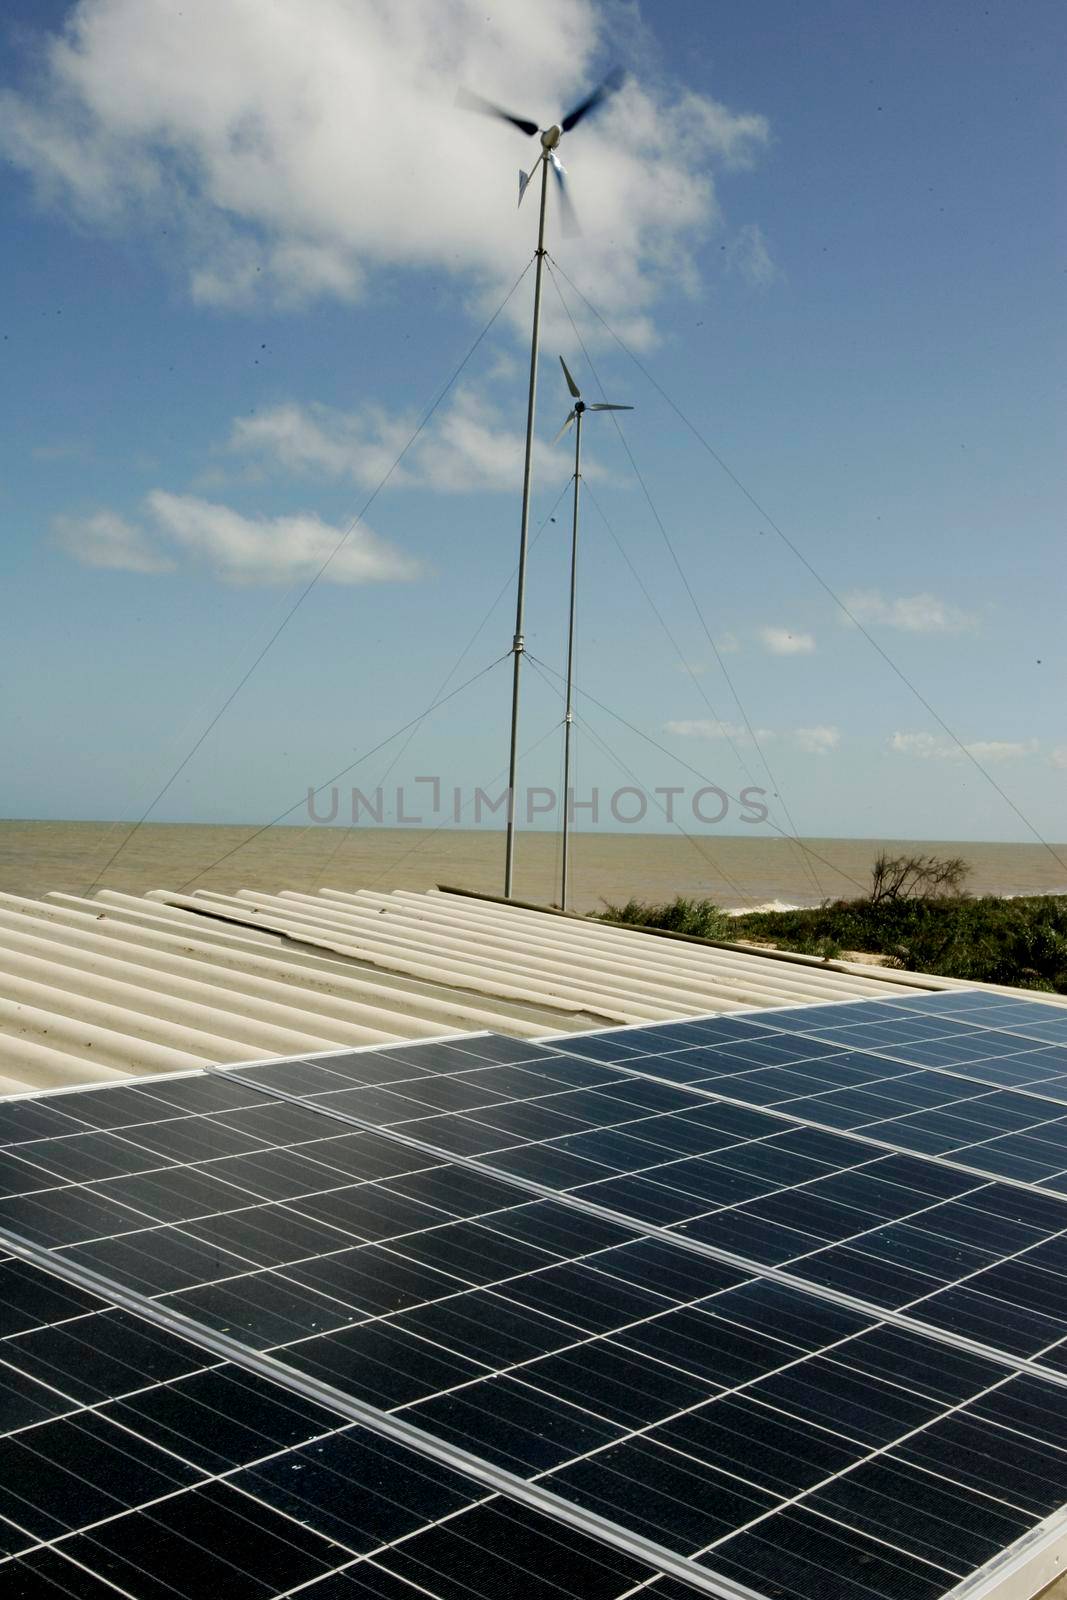 nova vicosa, bahia / brazil - september 8, 2009: solar energy generation plates are seen in a residence in the rural area of the city of Nova Vicosa, in southern Bahia.